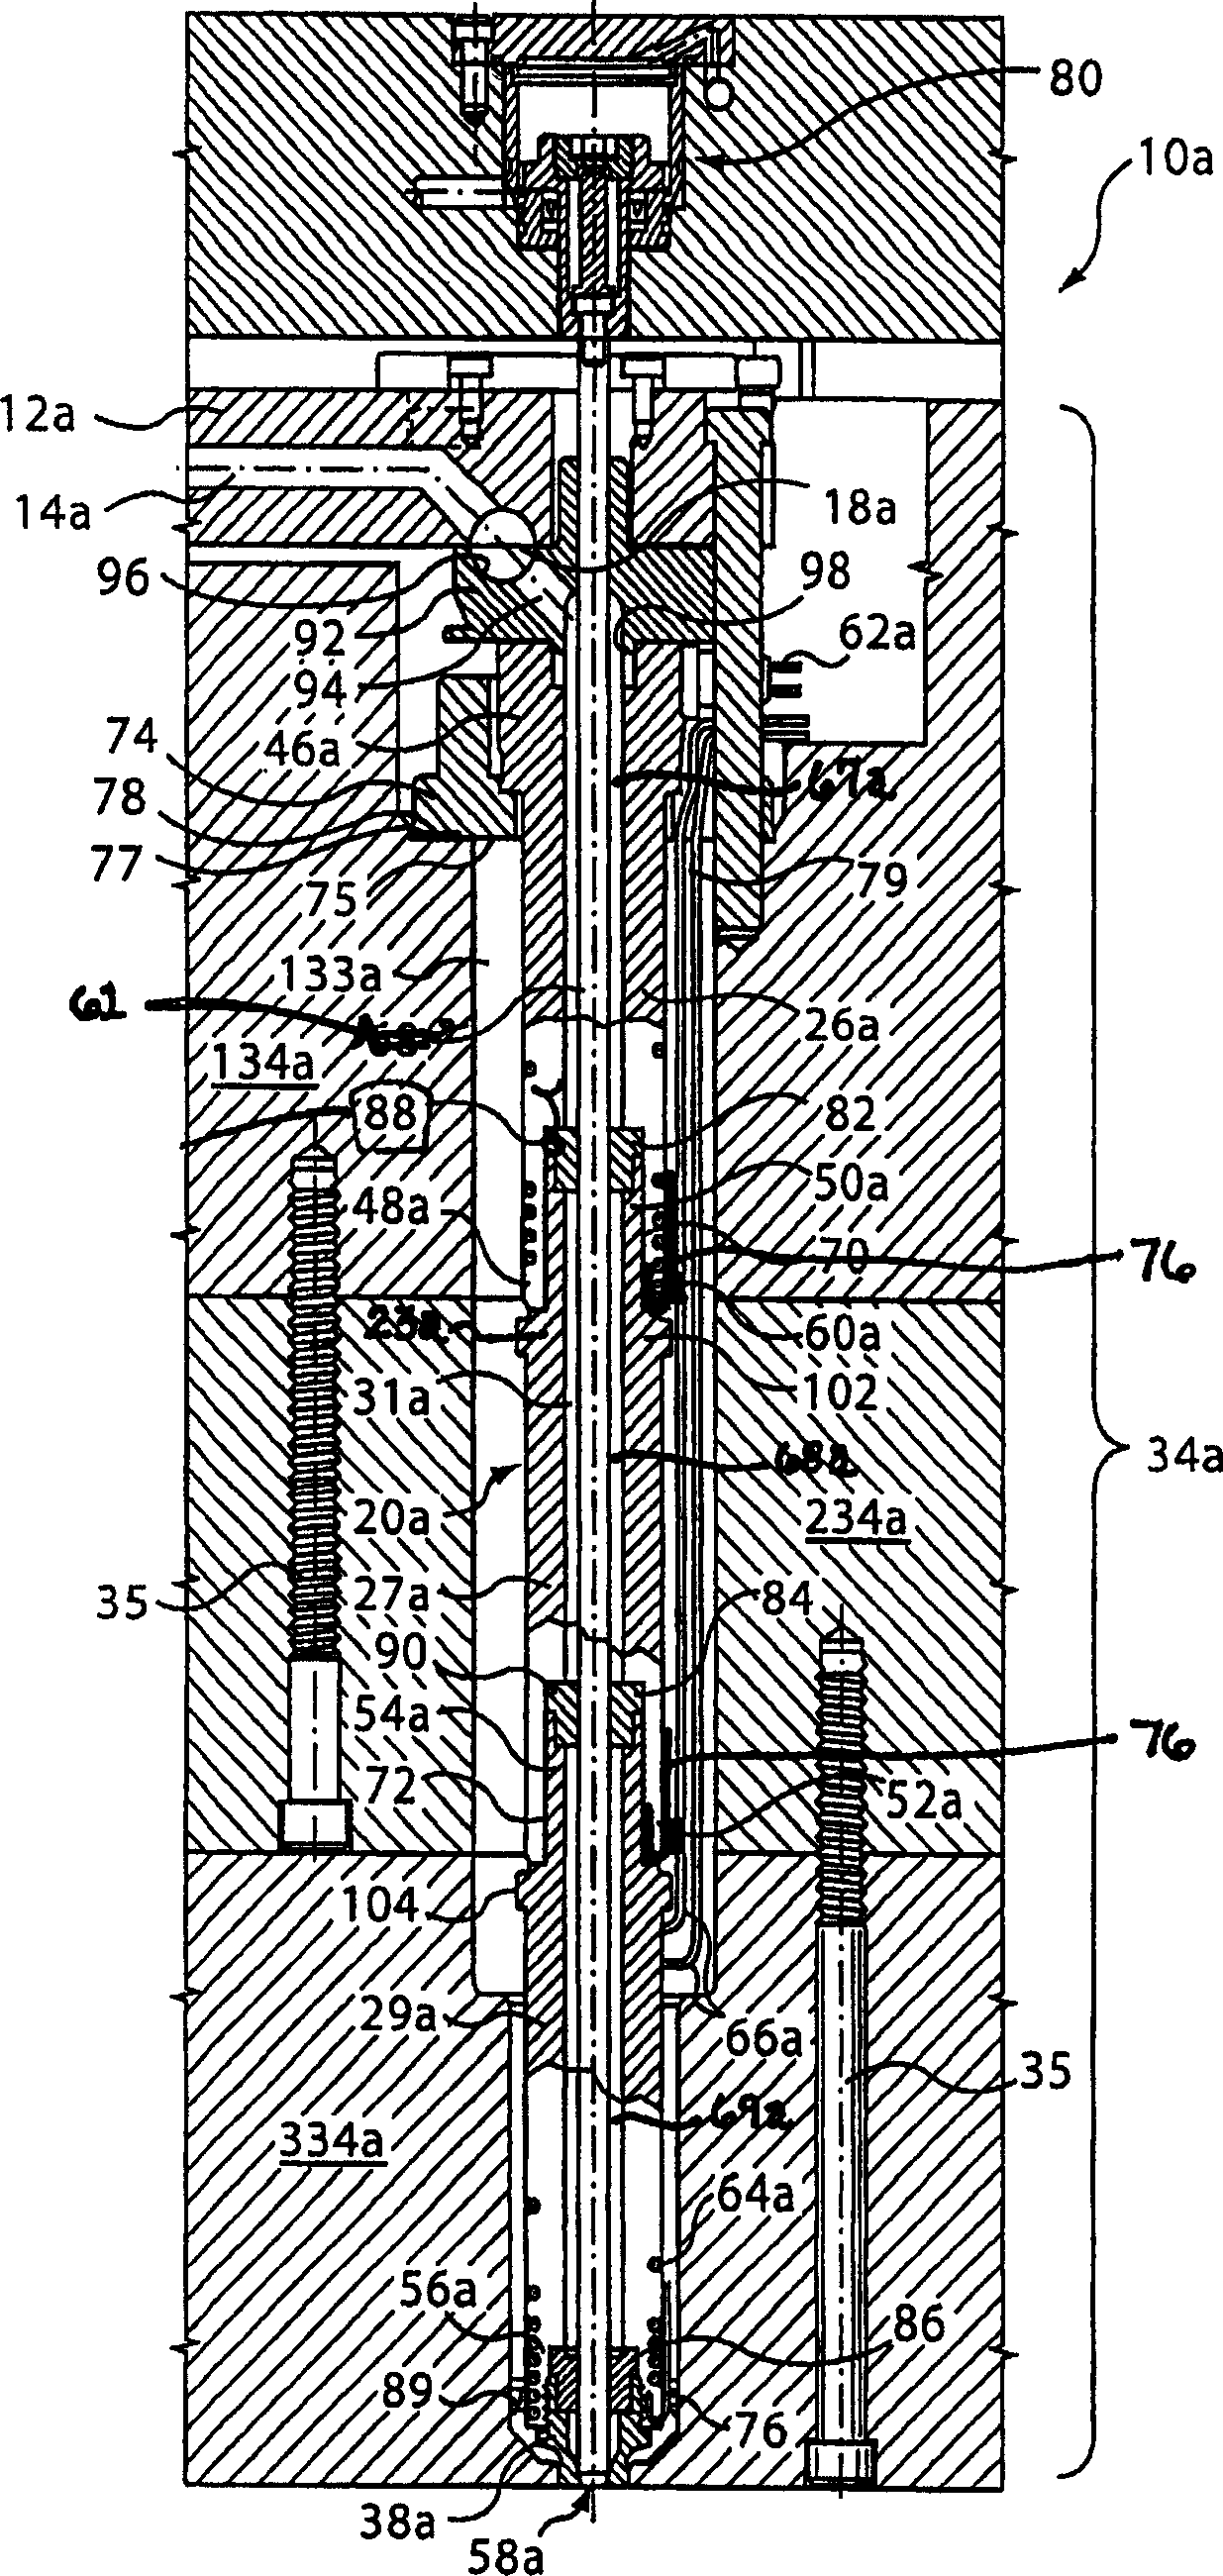 Nozzle having a nozzle body with heated and unheated nozzle body segments